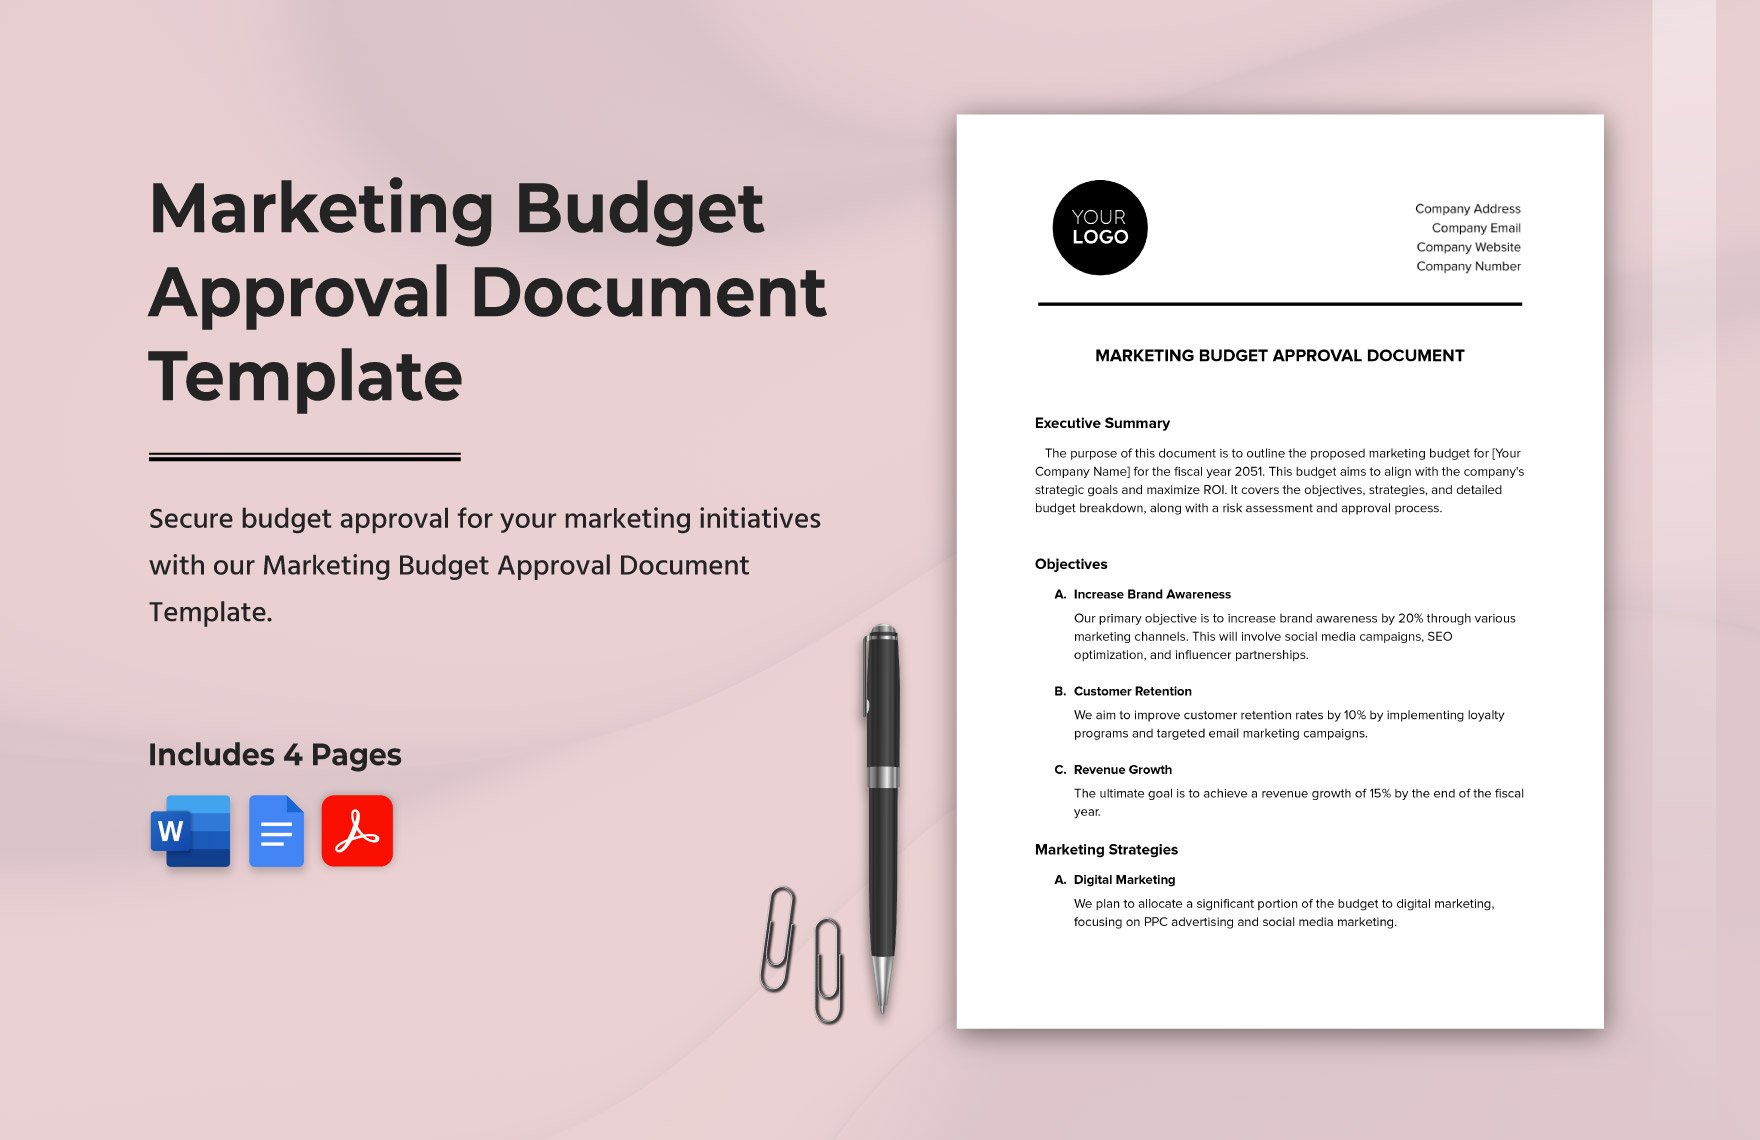 Budget Note Template - Download in Word, Google Docs, PDF